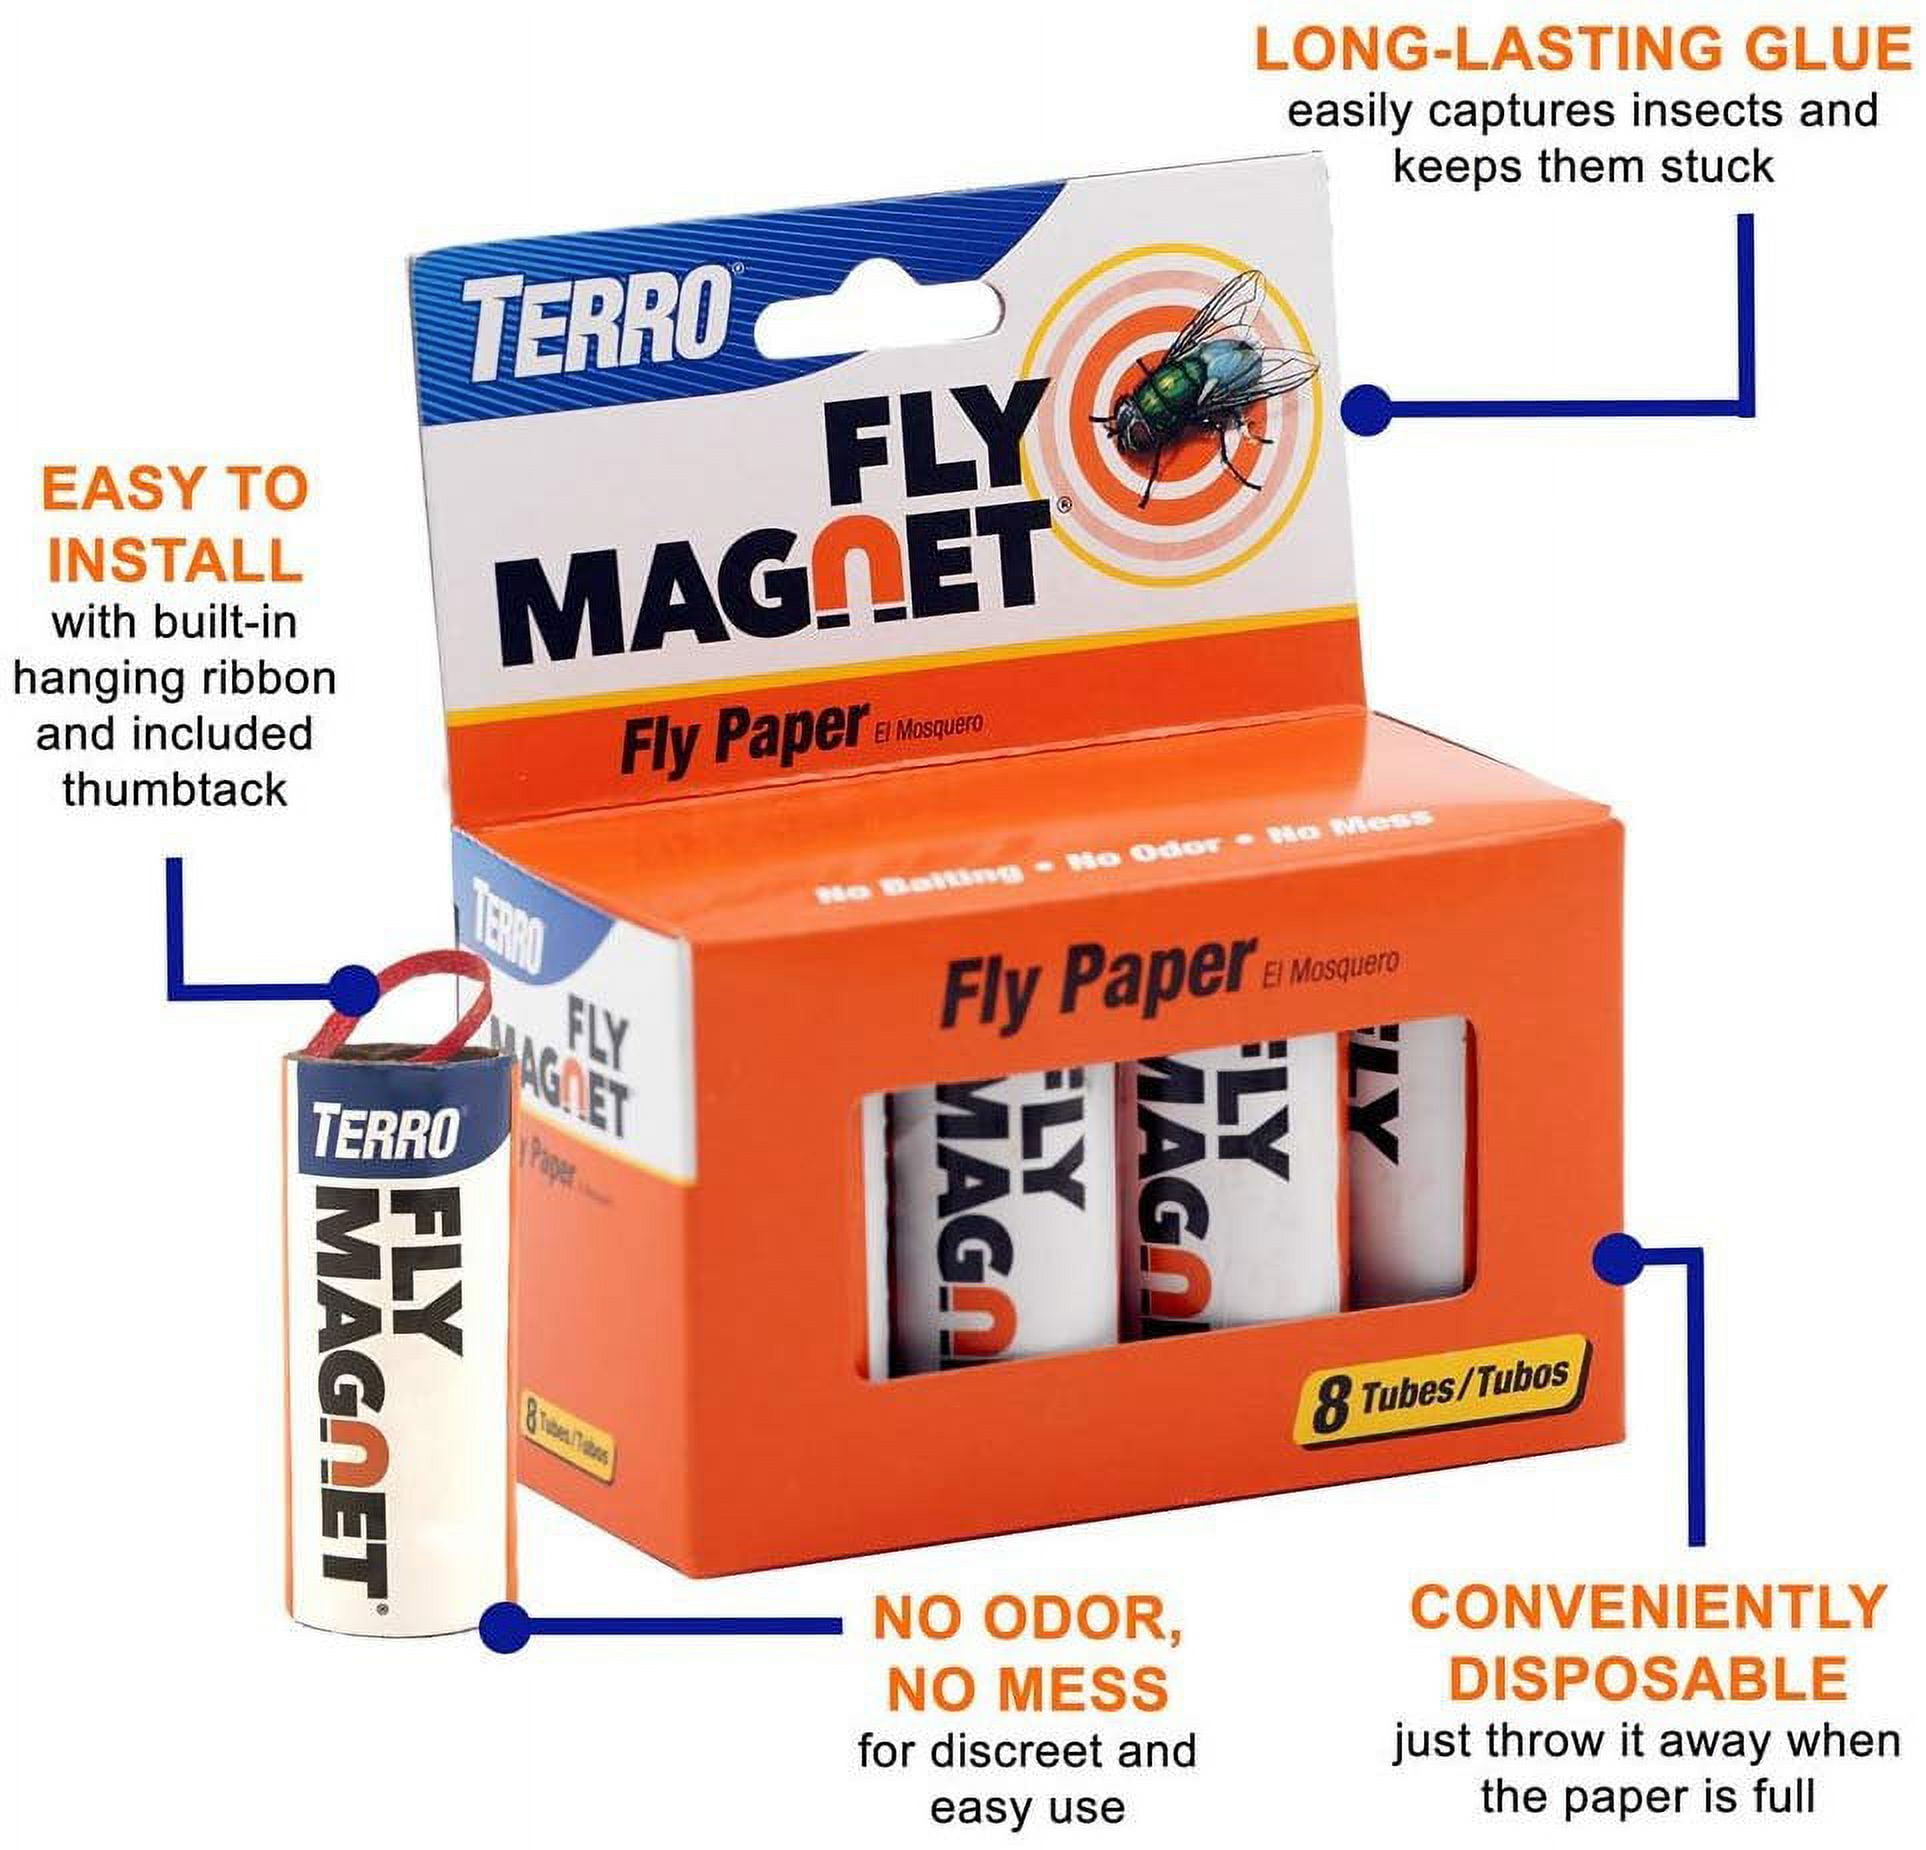 TERRO T518 Fly Magnet Sticky Fly Paper Fly Trap, 8 Count (Pack of